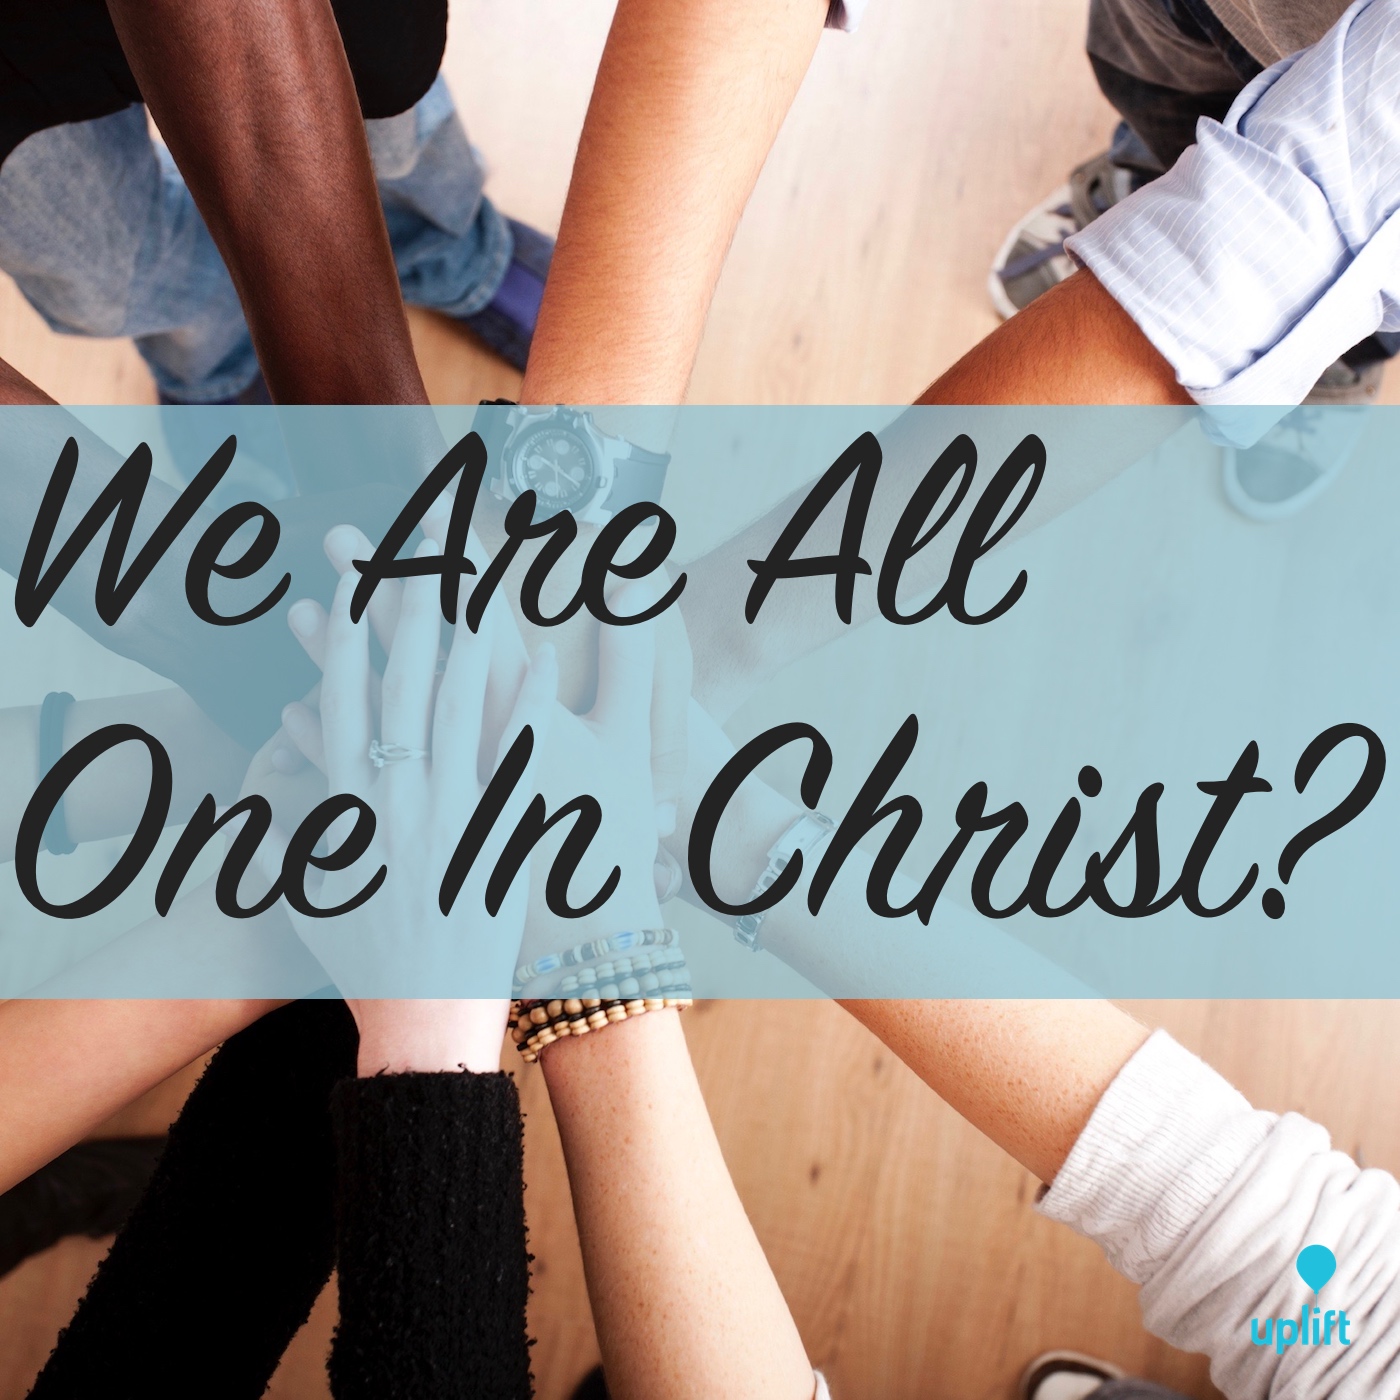 Episode 22: We Are All One In Christ?